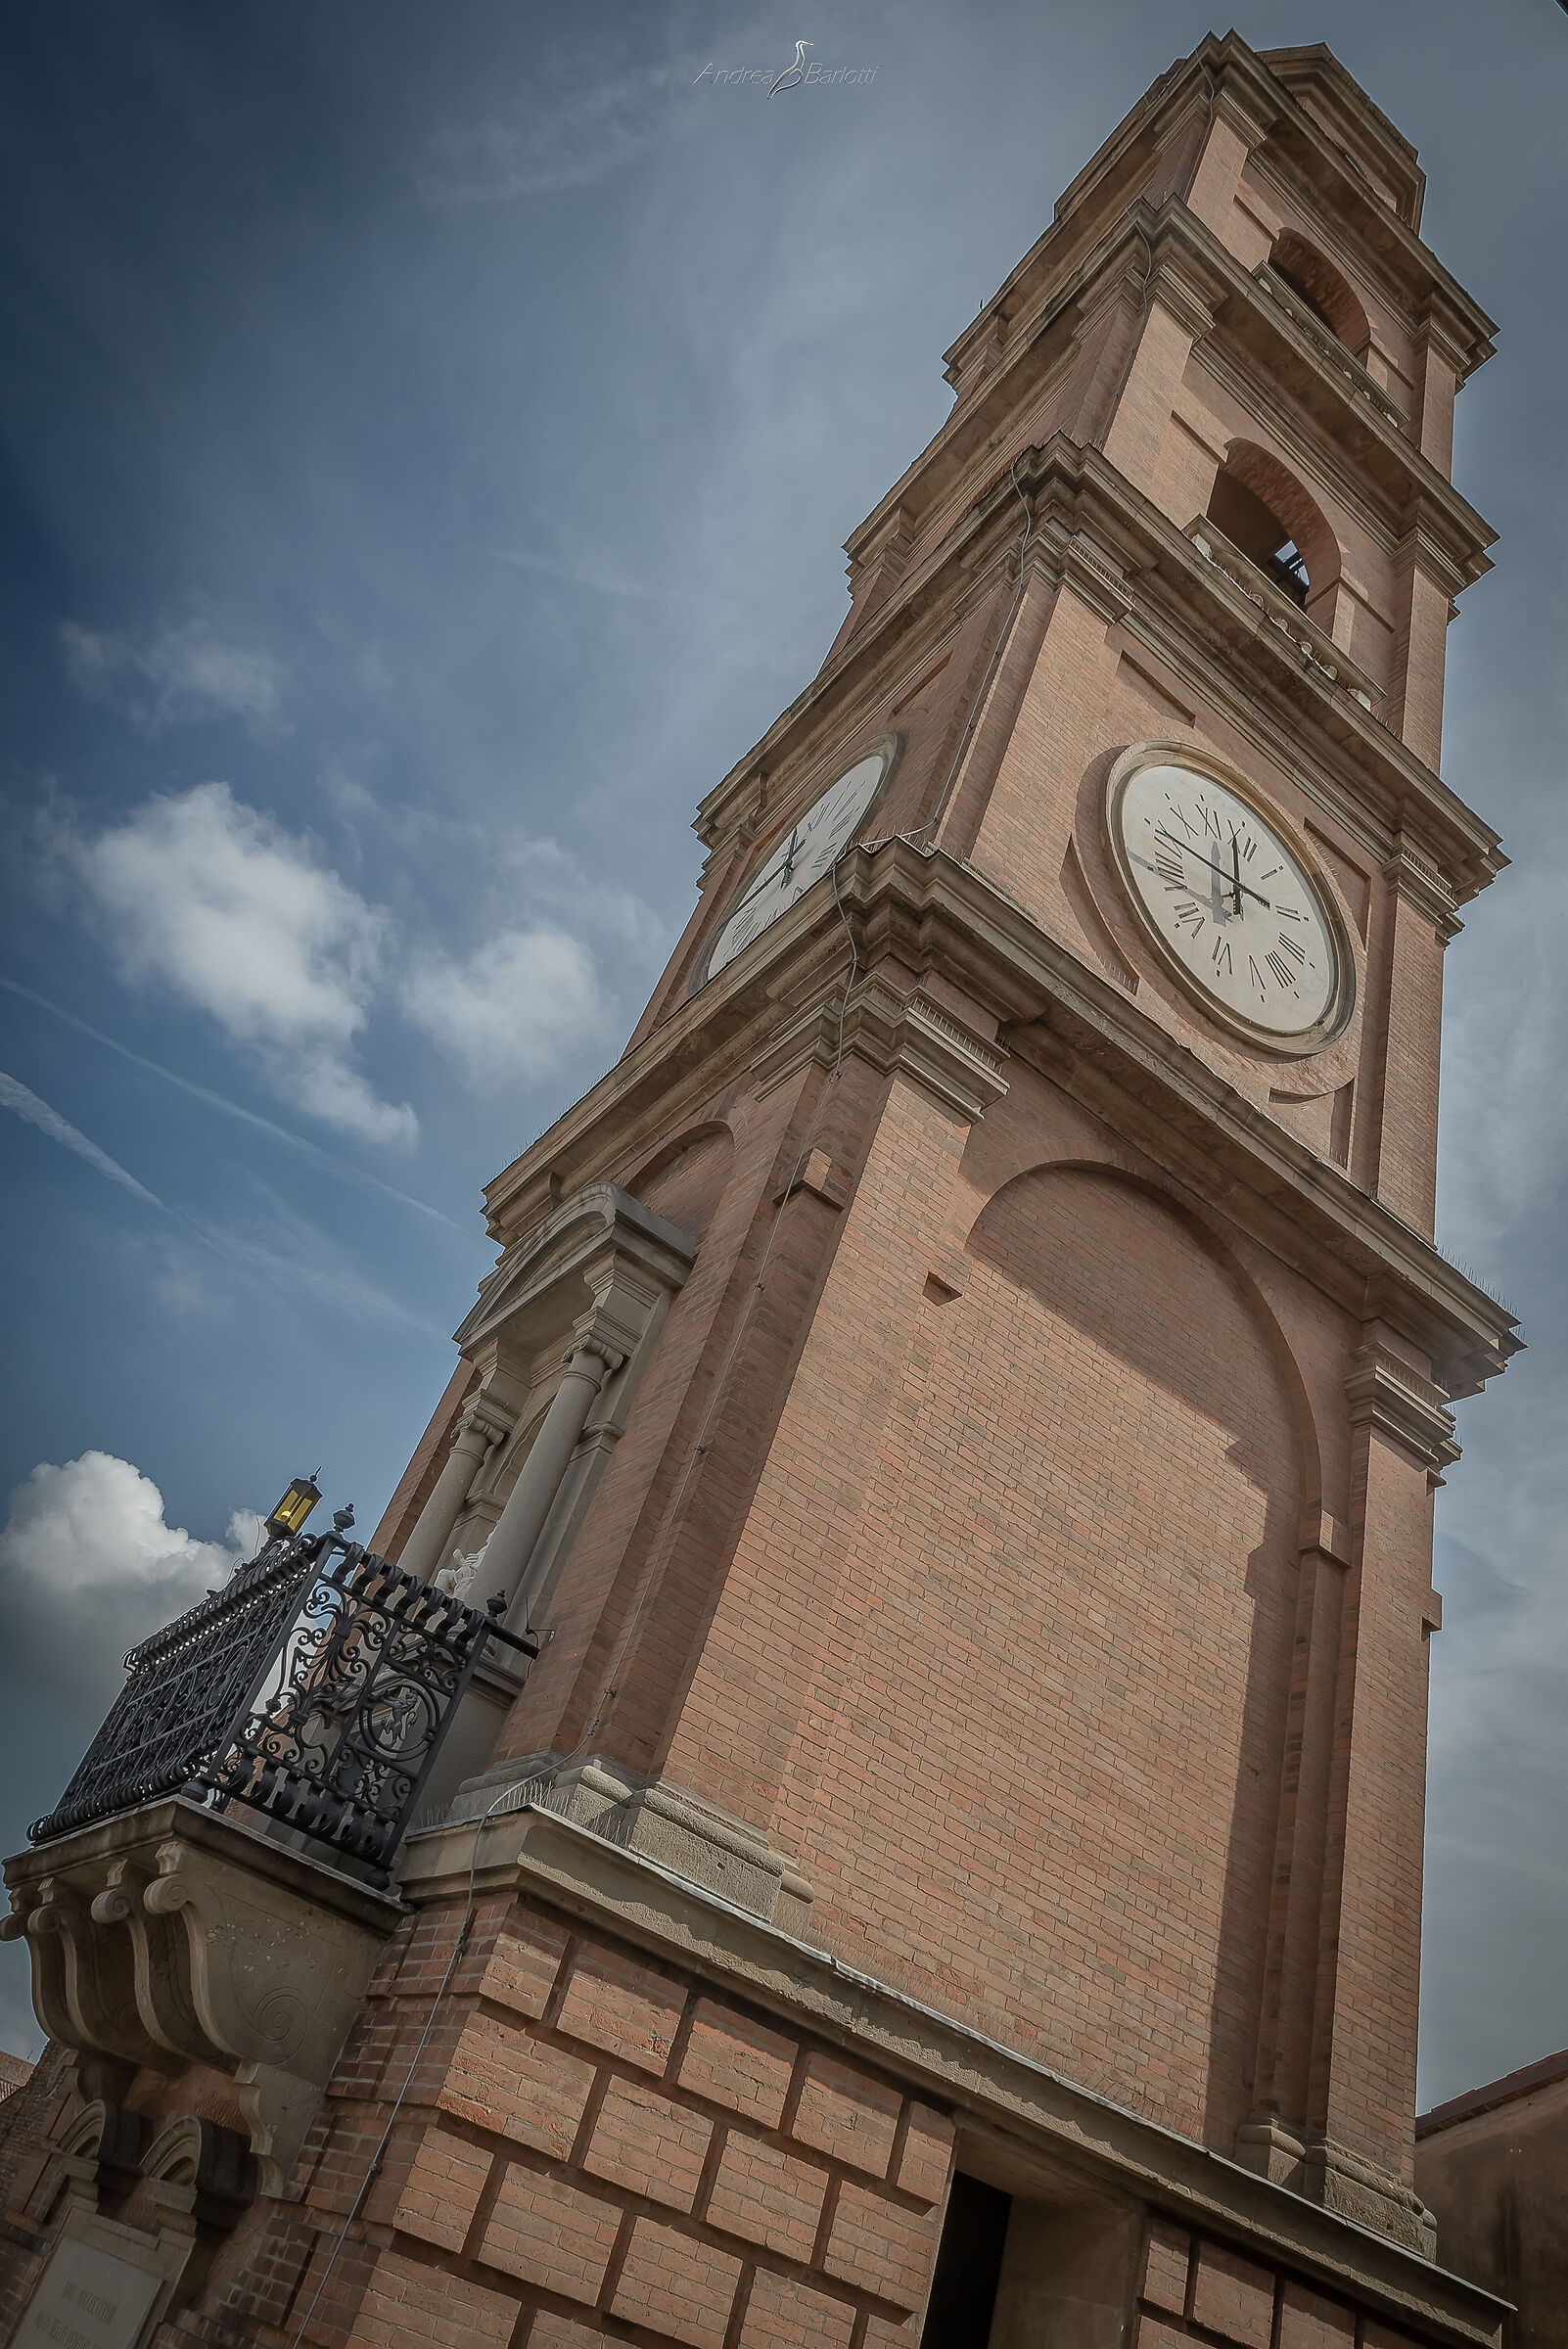 The Bell Tower of Faenza...